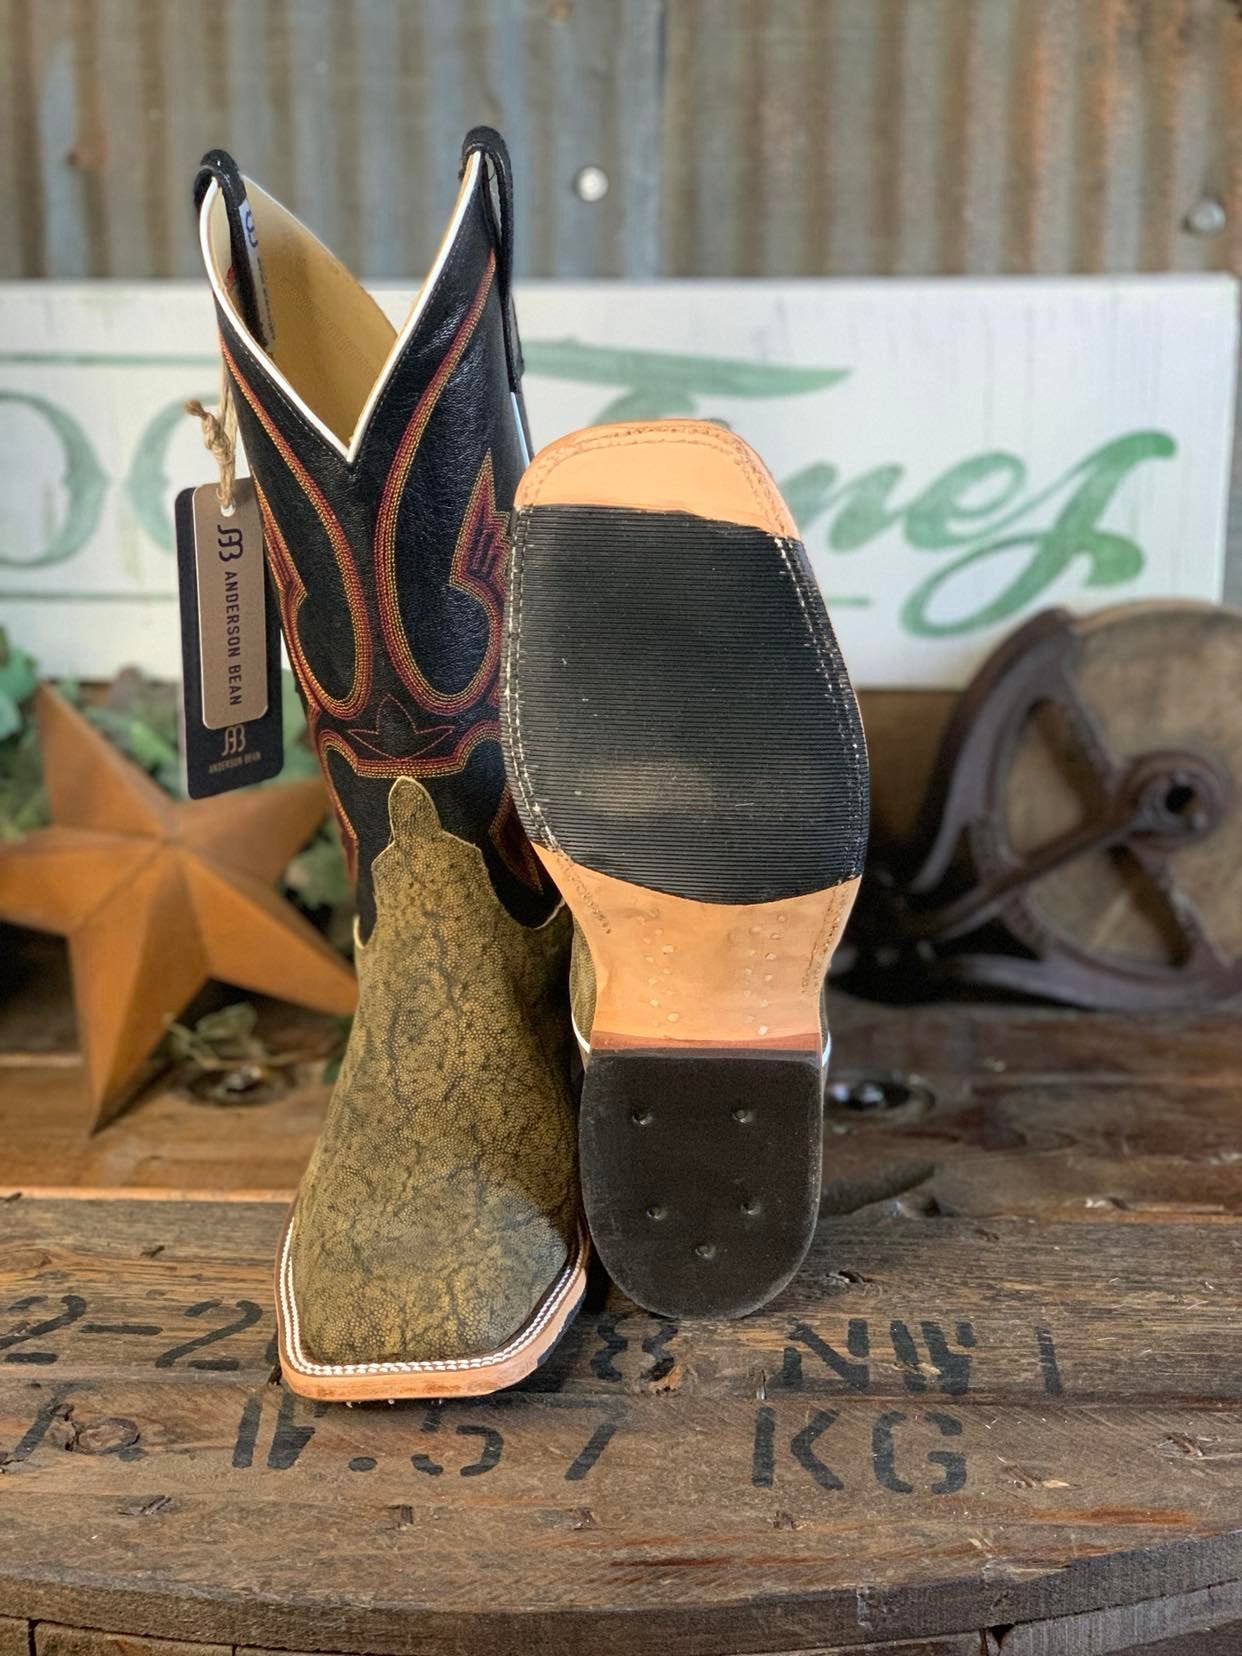 AB Antique Saddle Safari Elephant and Black Kidskin Boot-Men's Boots-Anderson Bean-Lucky J Boots & More, Women's, Men's, & Kids Western Store Located in Carthage, MO